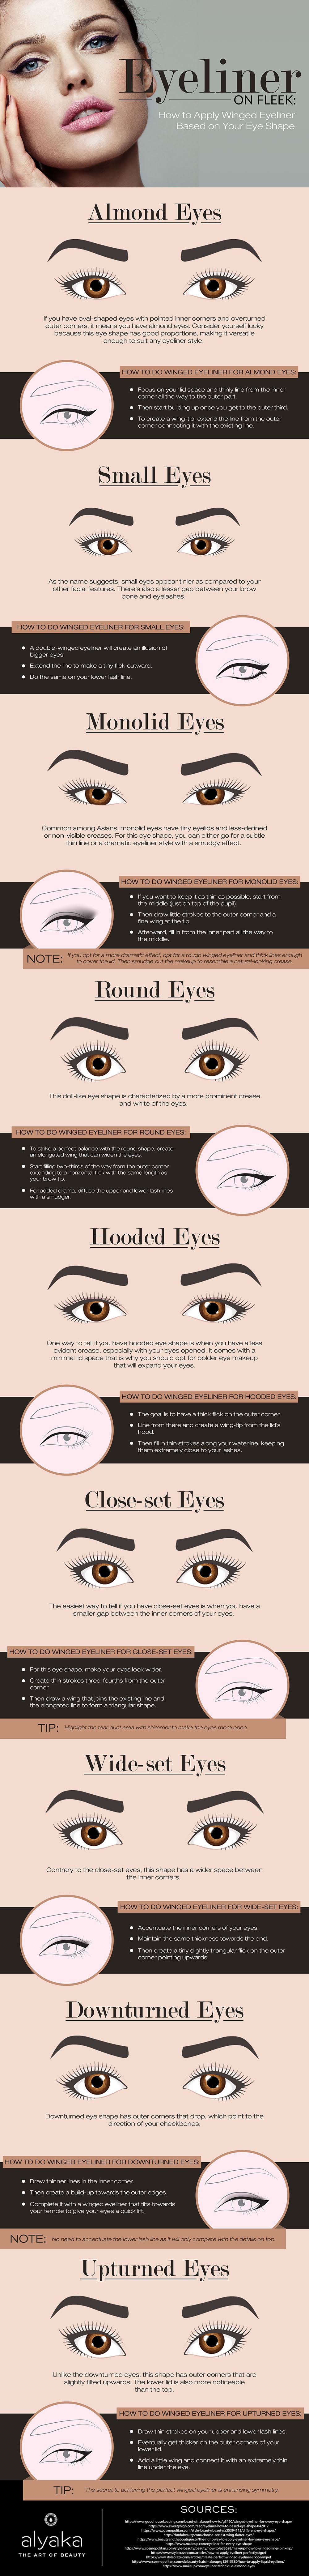 Eye Makeup Basics: How to Do Winged Eyeliner for Different Eye Shapes #infographic